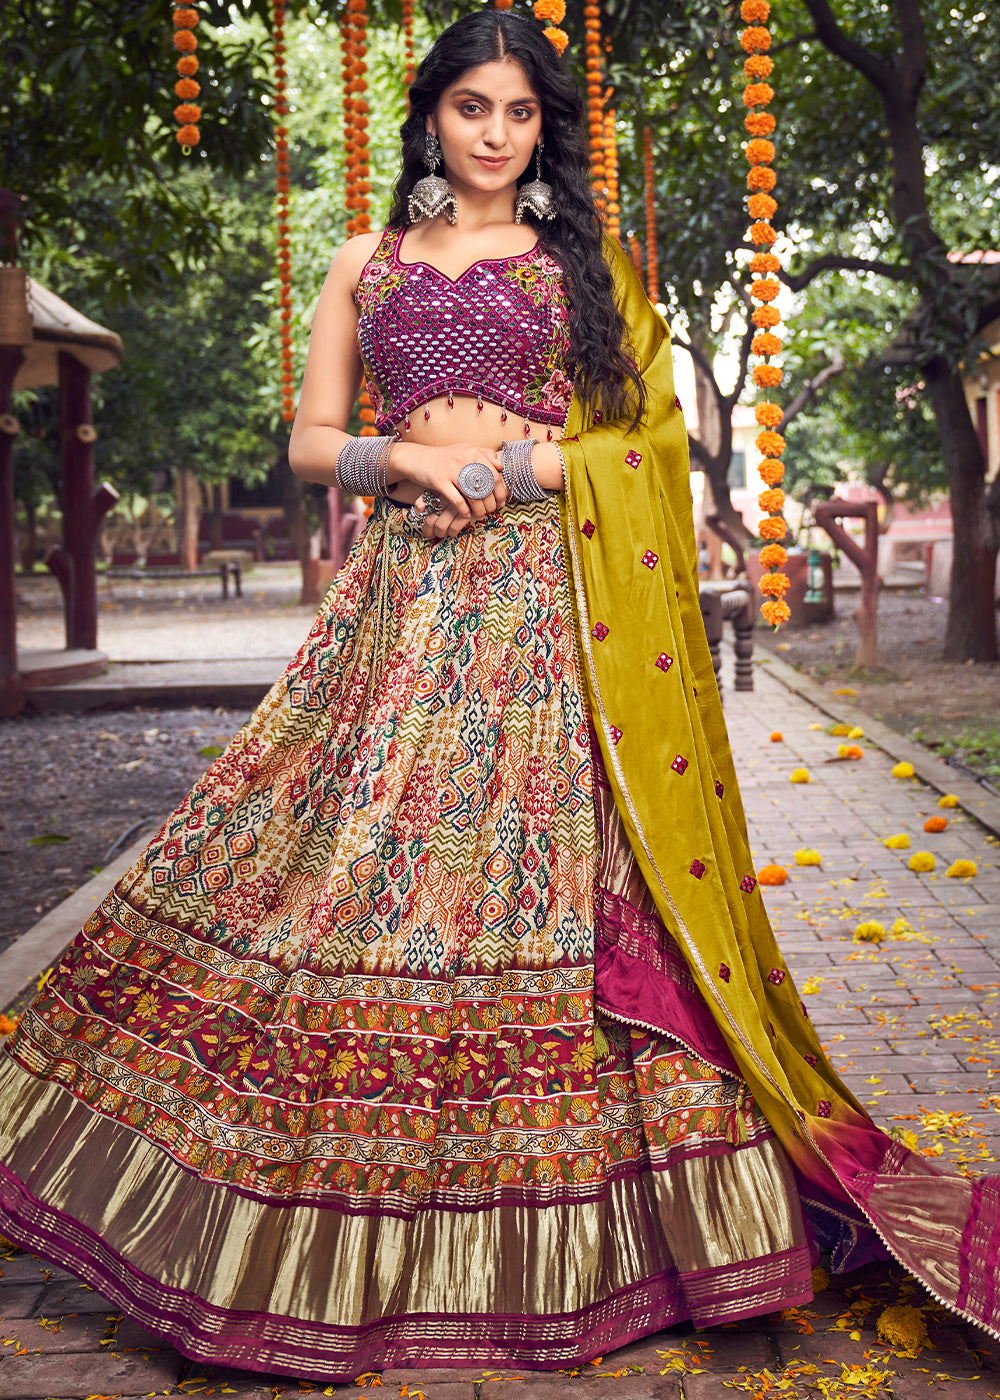 Esha Gupta In Yellow And Purple Lehenga Is What Regal Dreams Are Made Of,  See Her Gorgeous Ethnic Wear Looks - News18